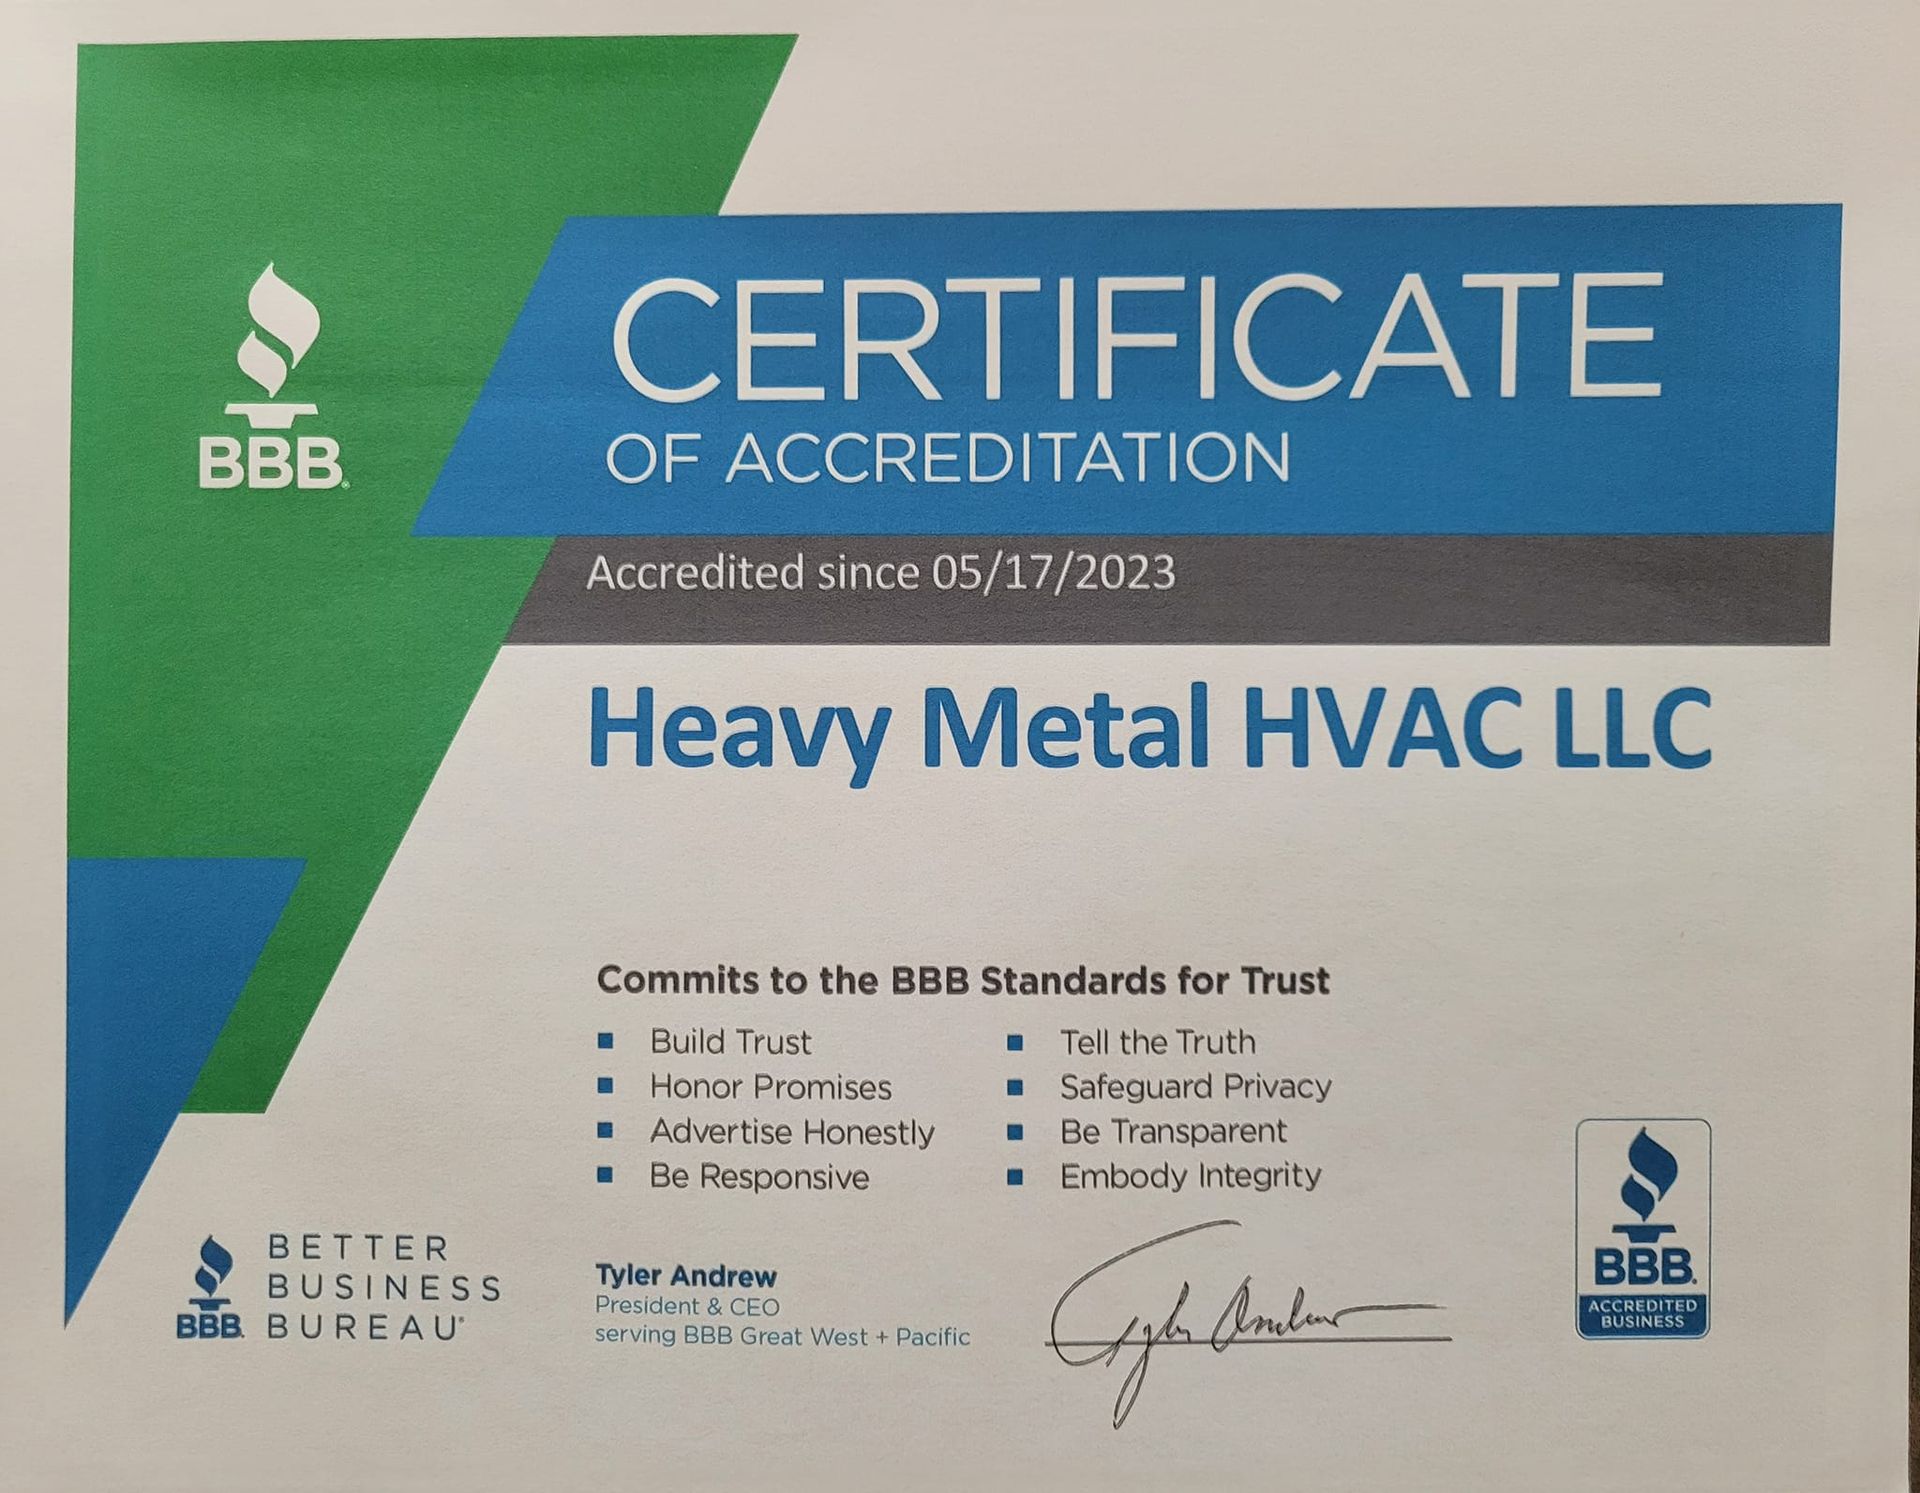 a certificate of accreditation for heavy metal hvac llc